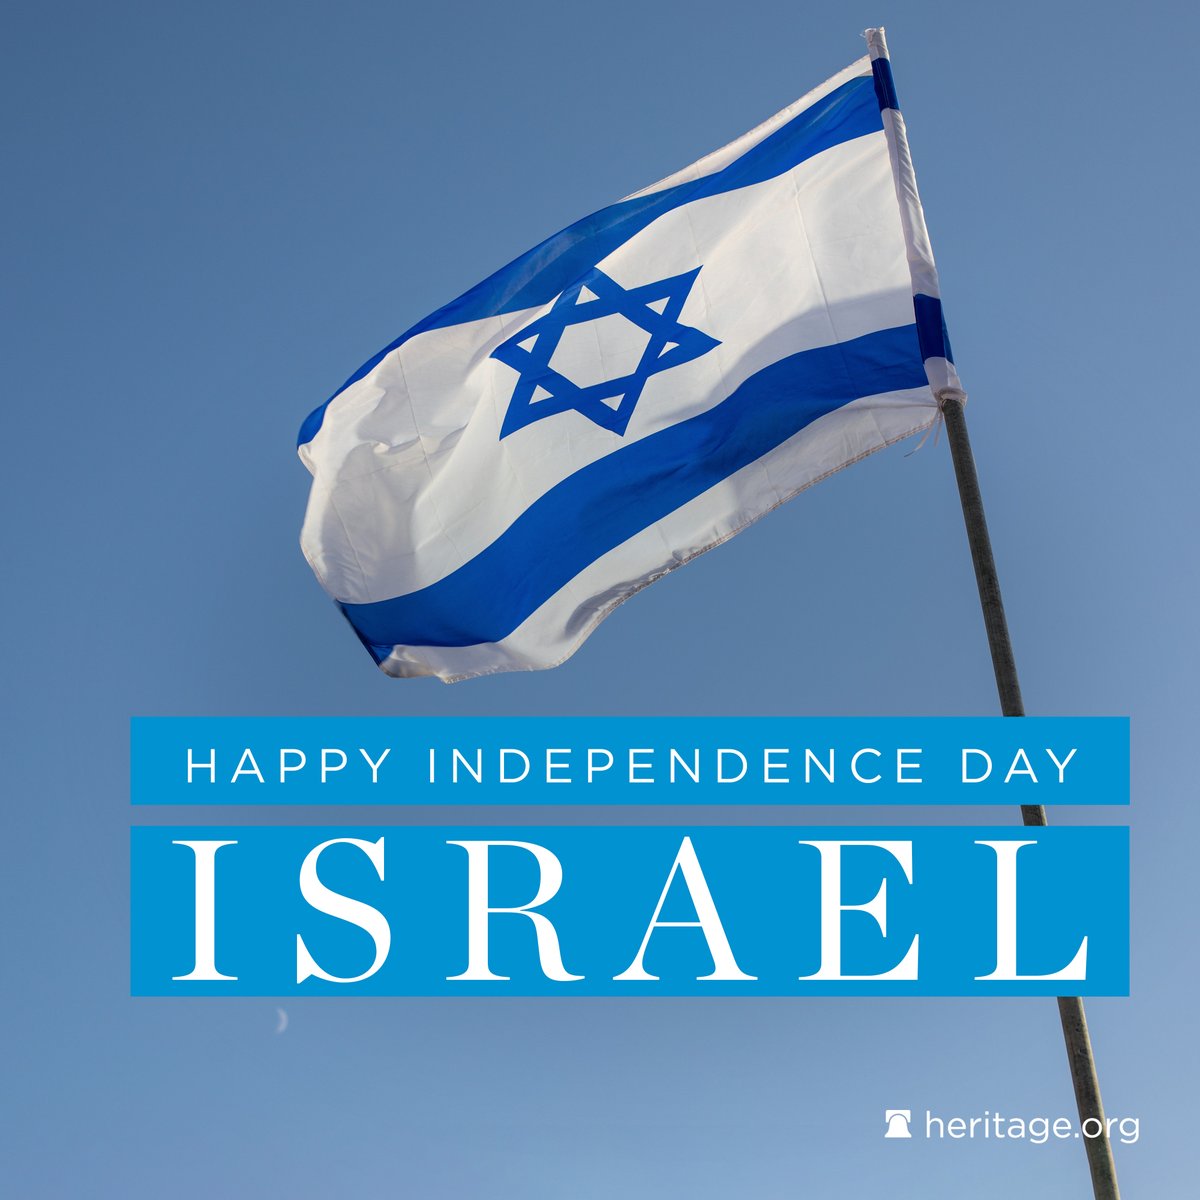 From all of us at The Heritage Foundation, happy 76th Independence Day to America’s great ally and friend, Israel! Even amidst these most trying times, we stand with you in your fight to preserve your nation for generations to come.